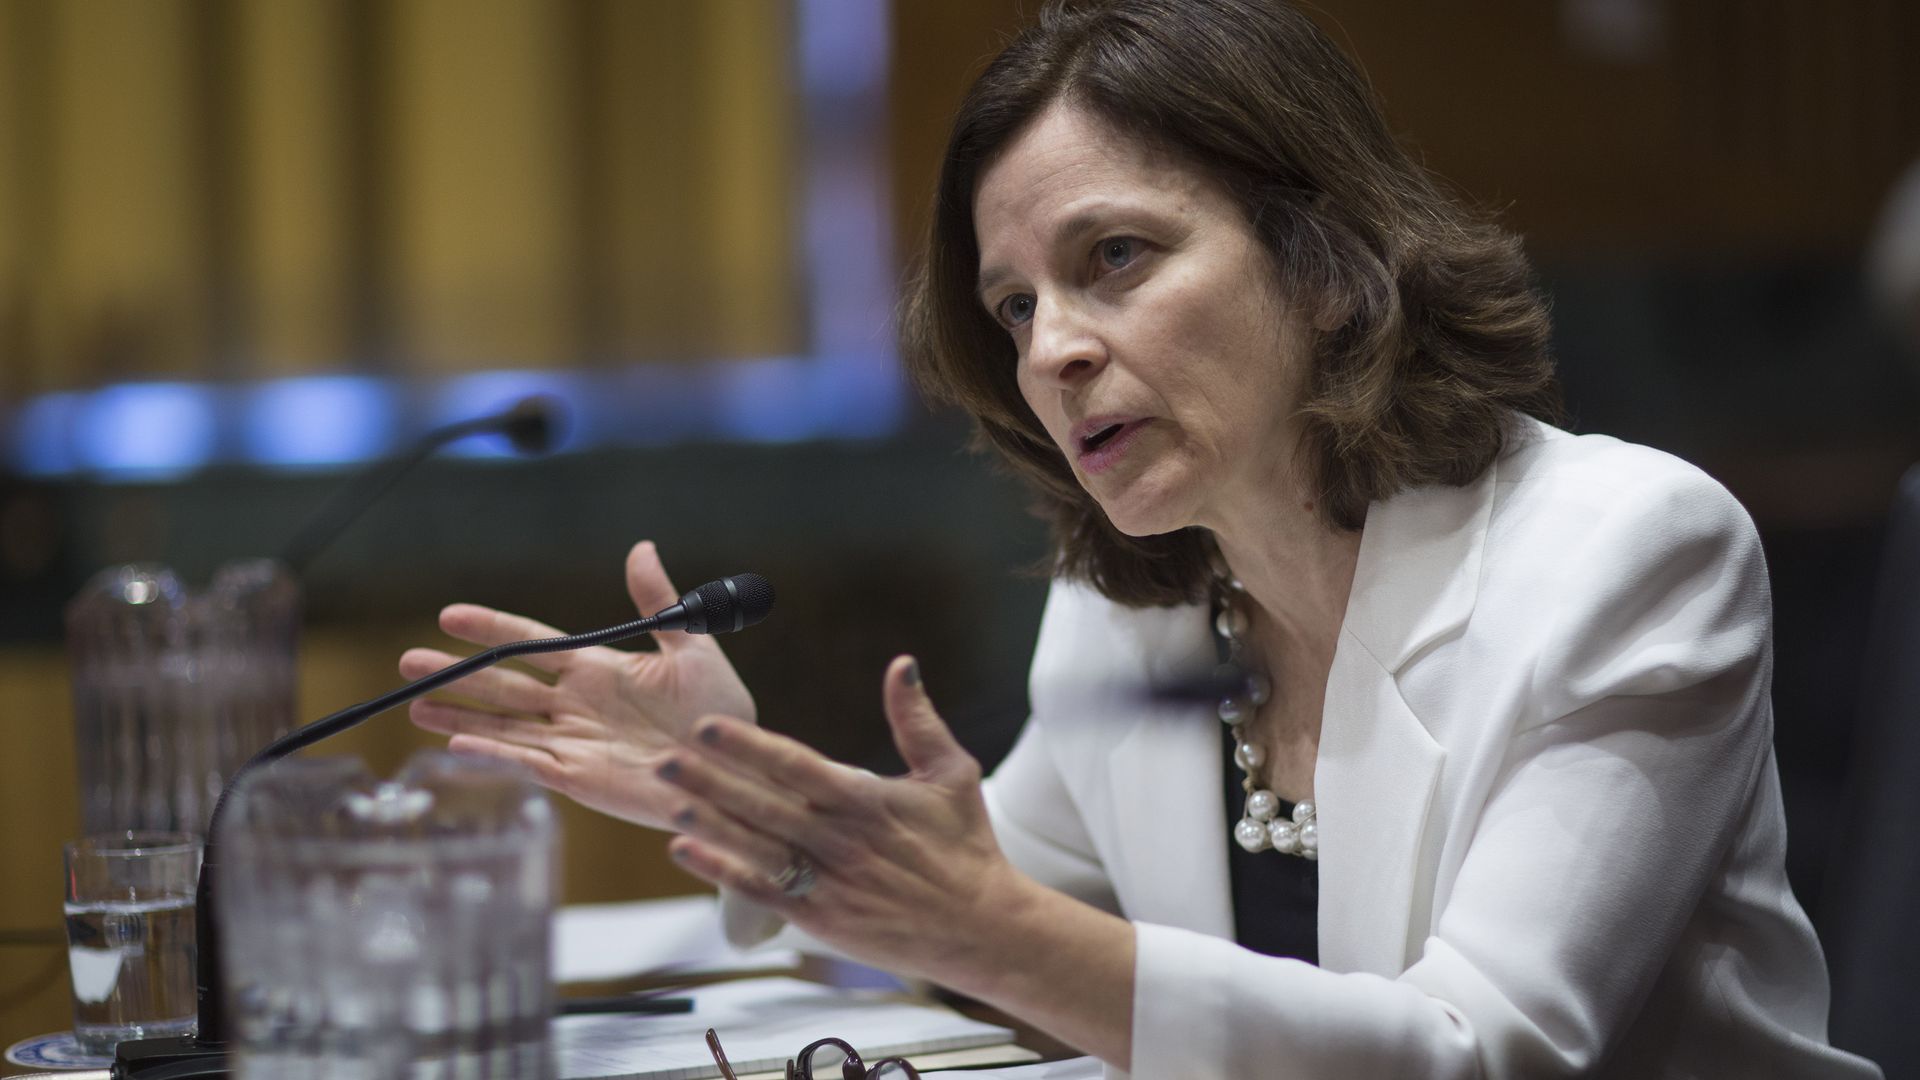 Sarah Bloom Raskin, at a 2013 hearing. Photo: Andrew Harrer/Bloomberg via Getty Images